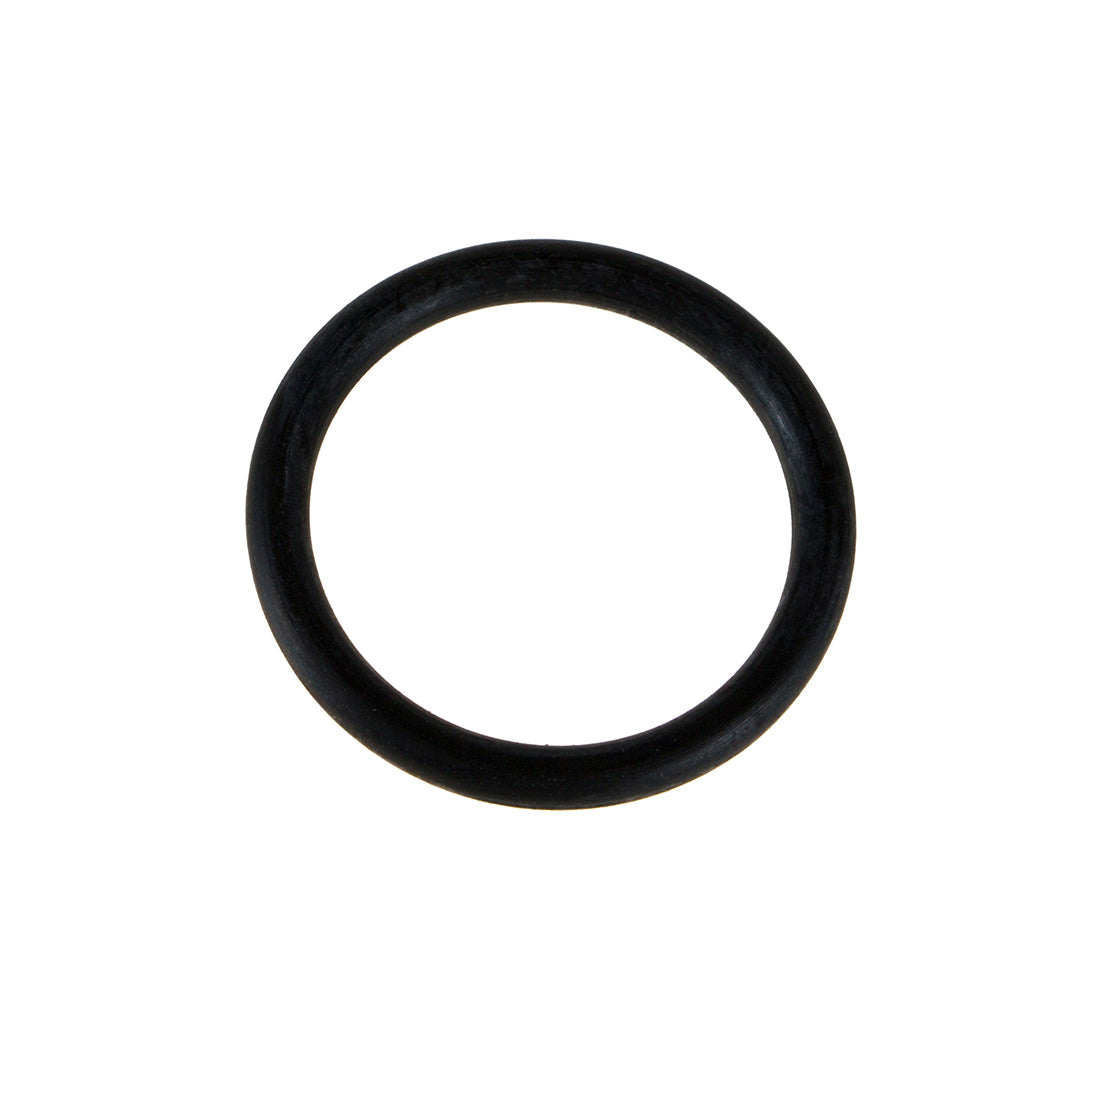 Copy of ANSUL SENTRY EXTINGUISHER REPLACEMENT O-RING